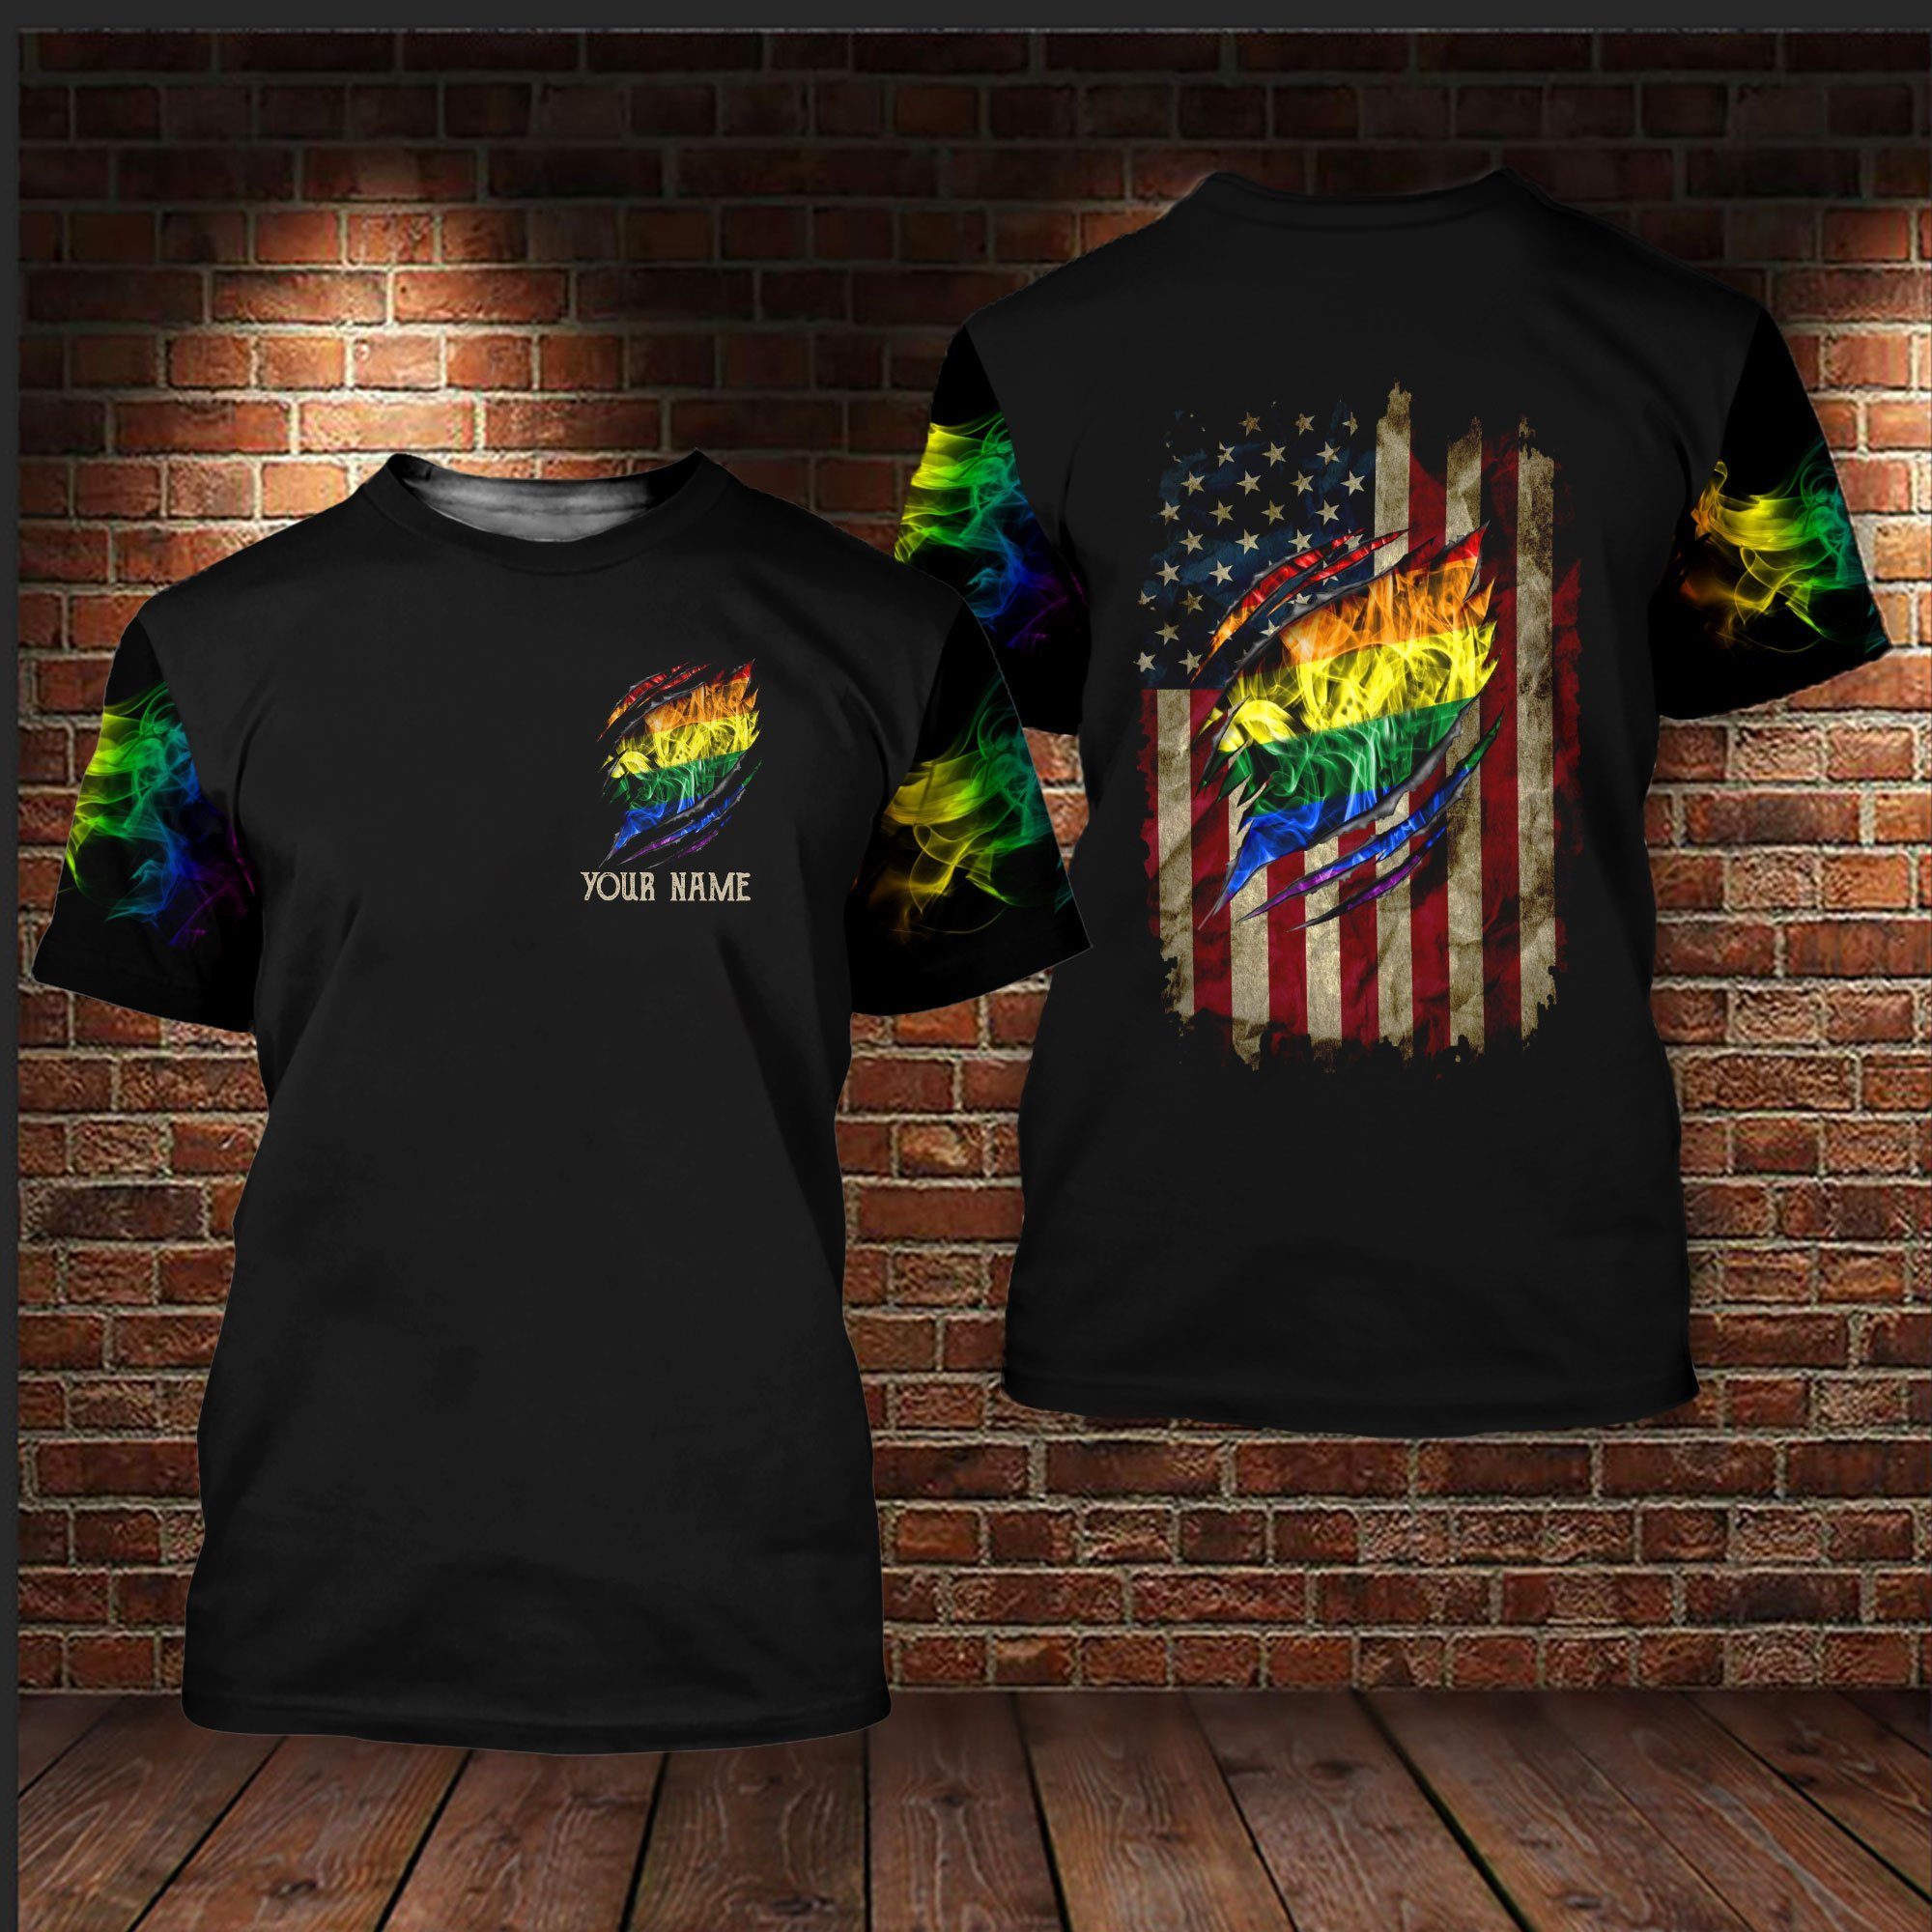 Personalized With Name Gay Pride Shirt/ Lesbian Shirt For Pride Month/ Gifts For LGBTQ Friends